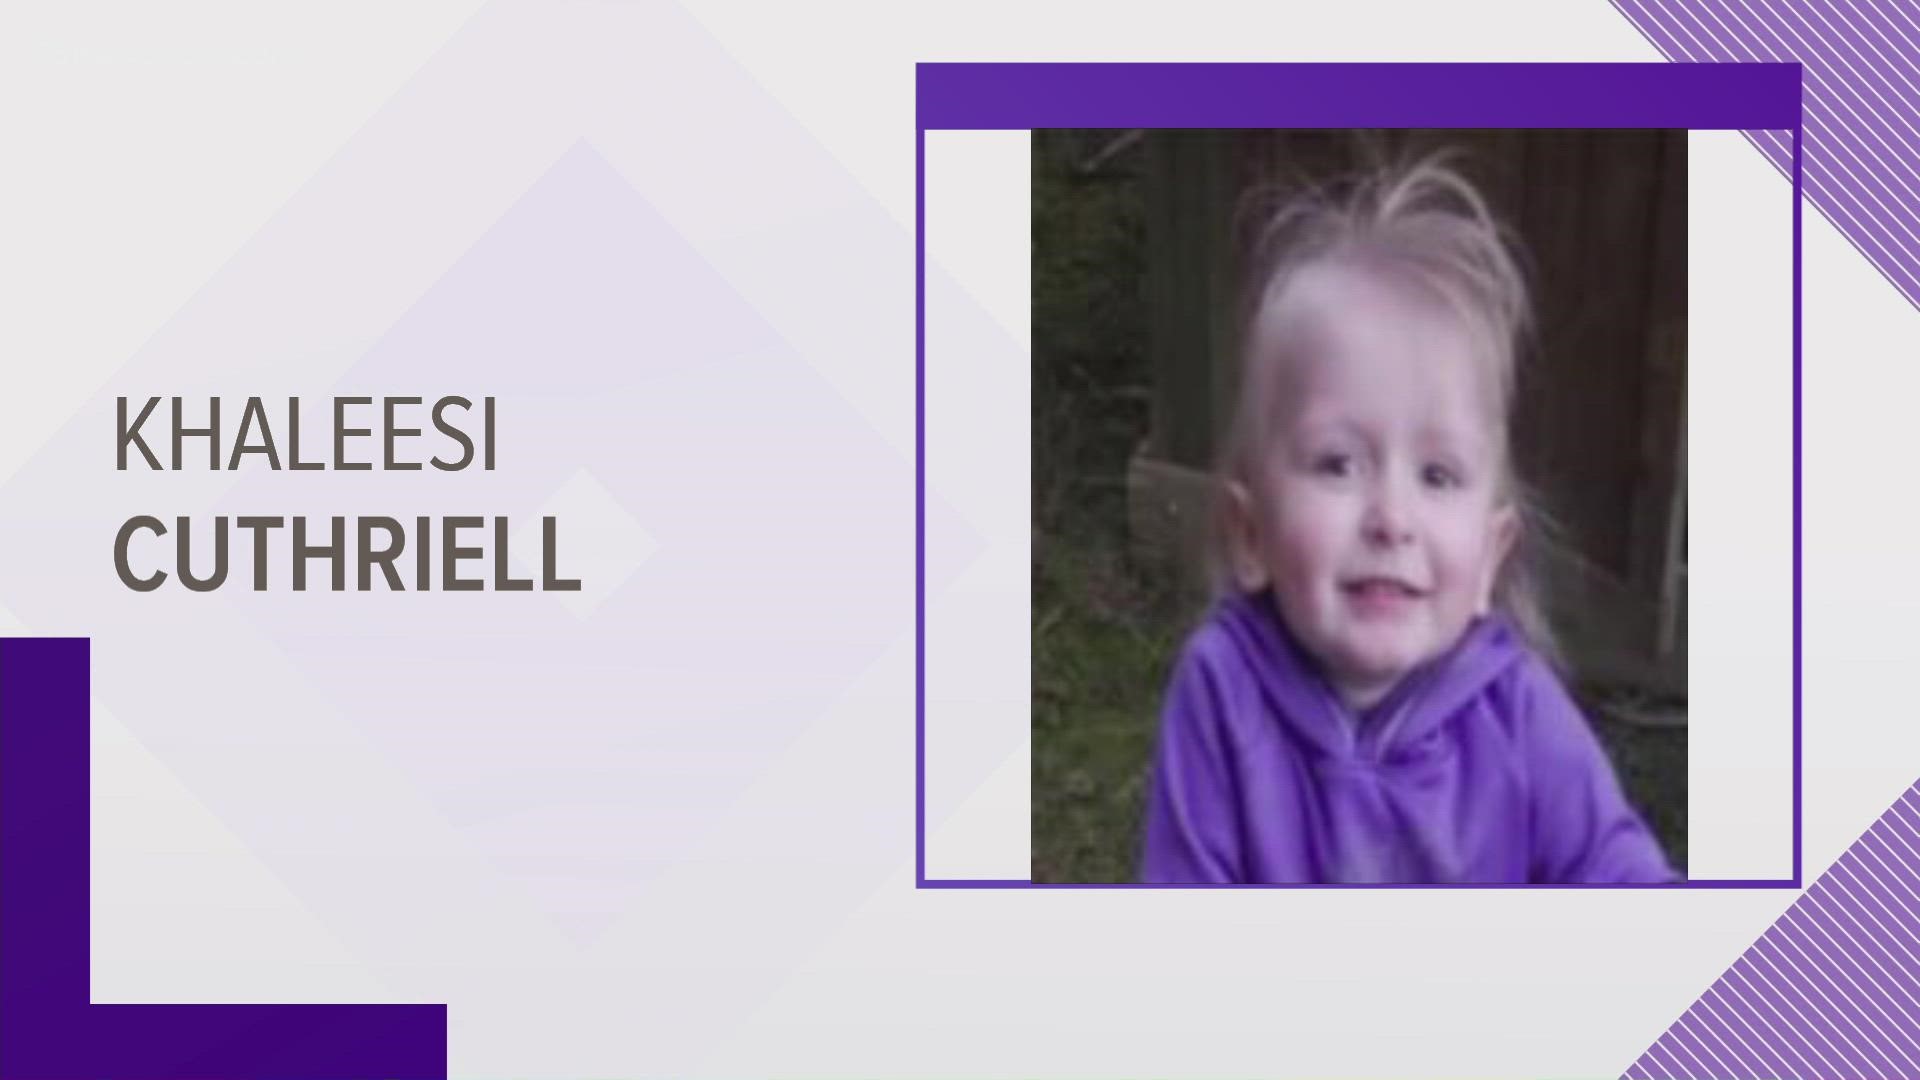 No one has seen 3-year-old Khaleesi Hope Cuthriell since February 2021. The woman in question who may have last been with Cuthriell, Candi Royer, has been located.